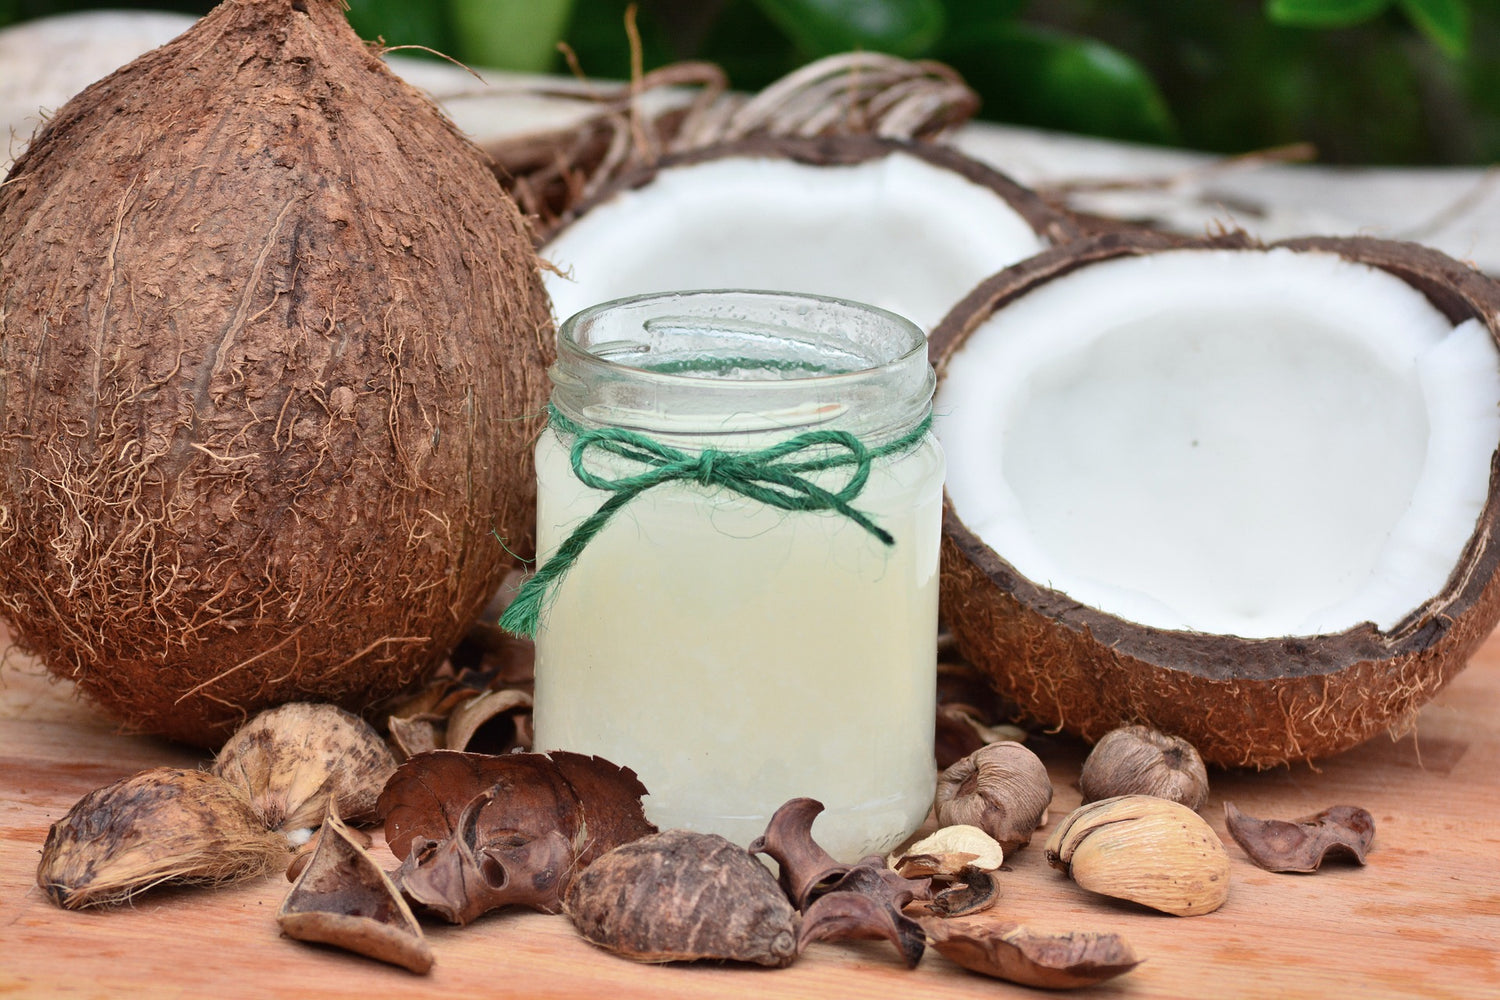 Jar of white coconut oil with coconuts in background on wooden table